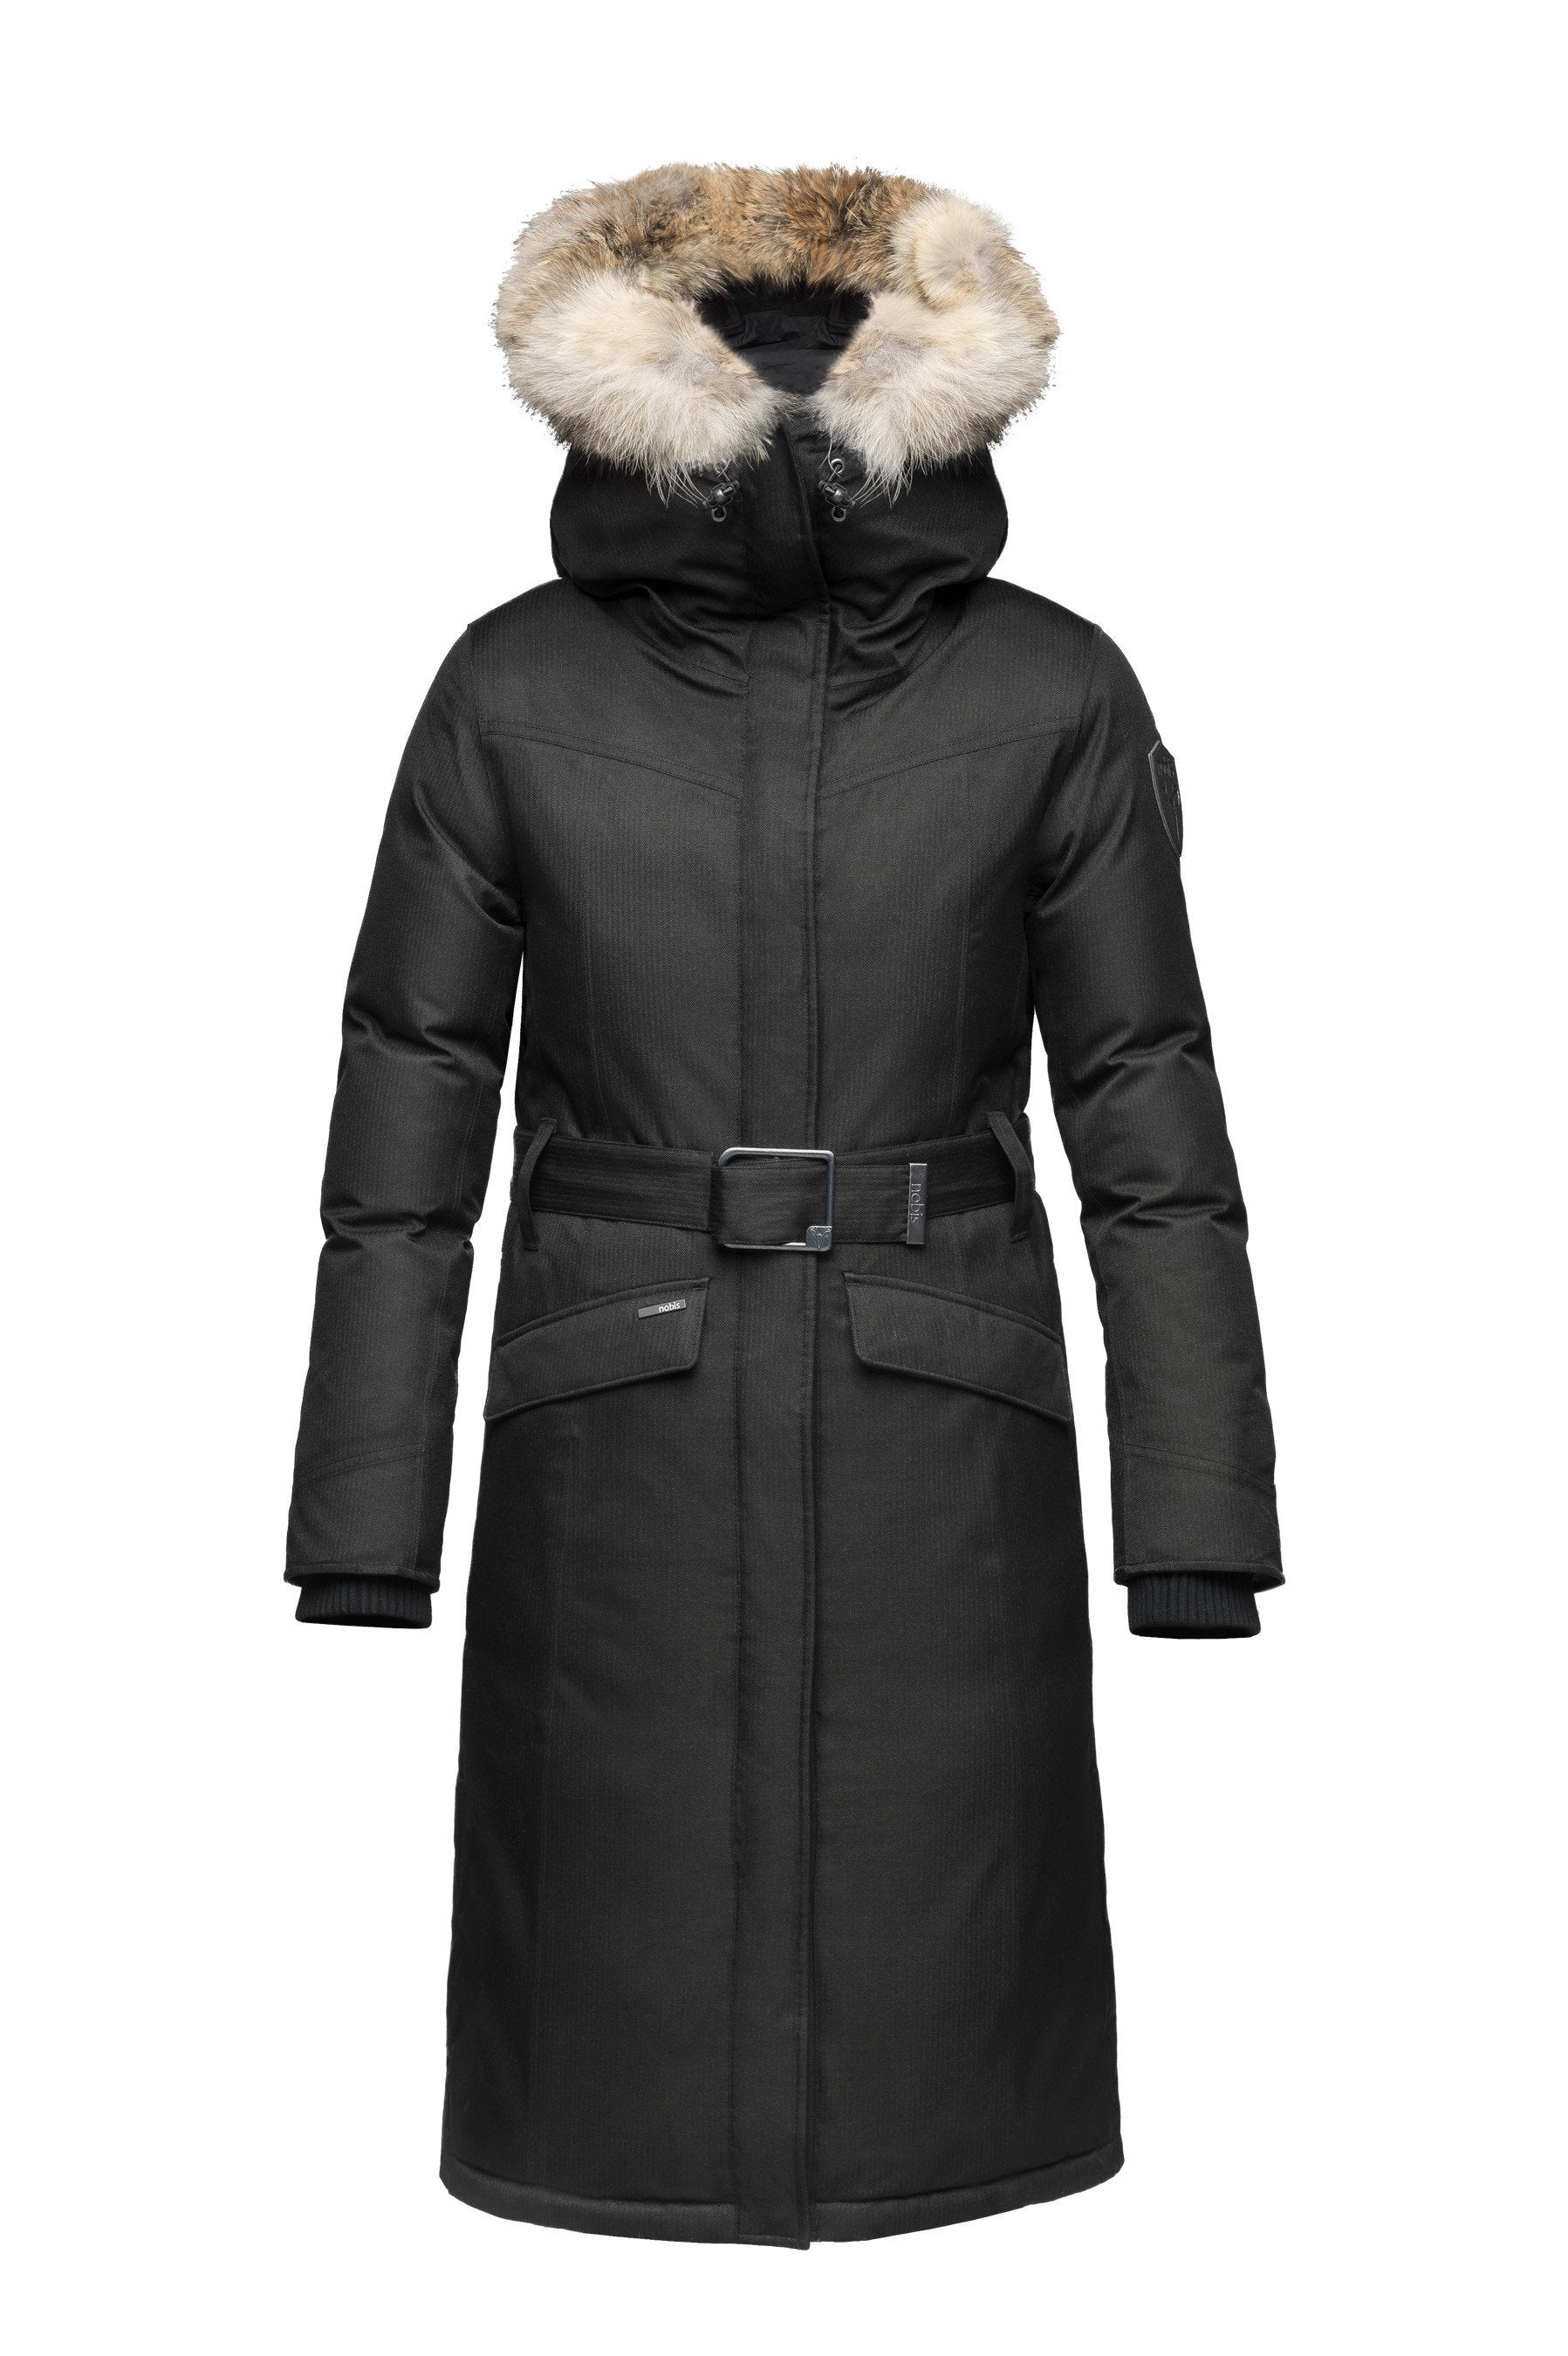 Women's maxi down filled parka with calf length hem in CH Black